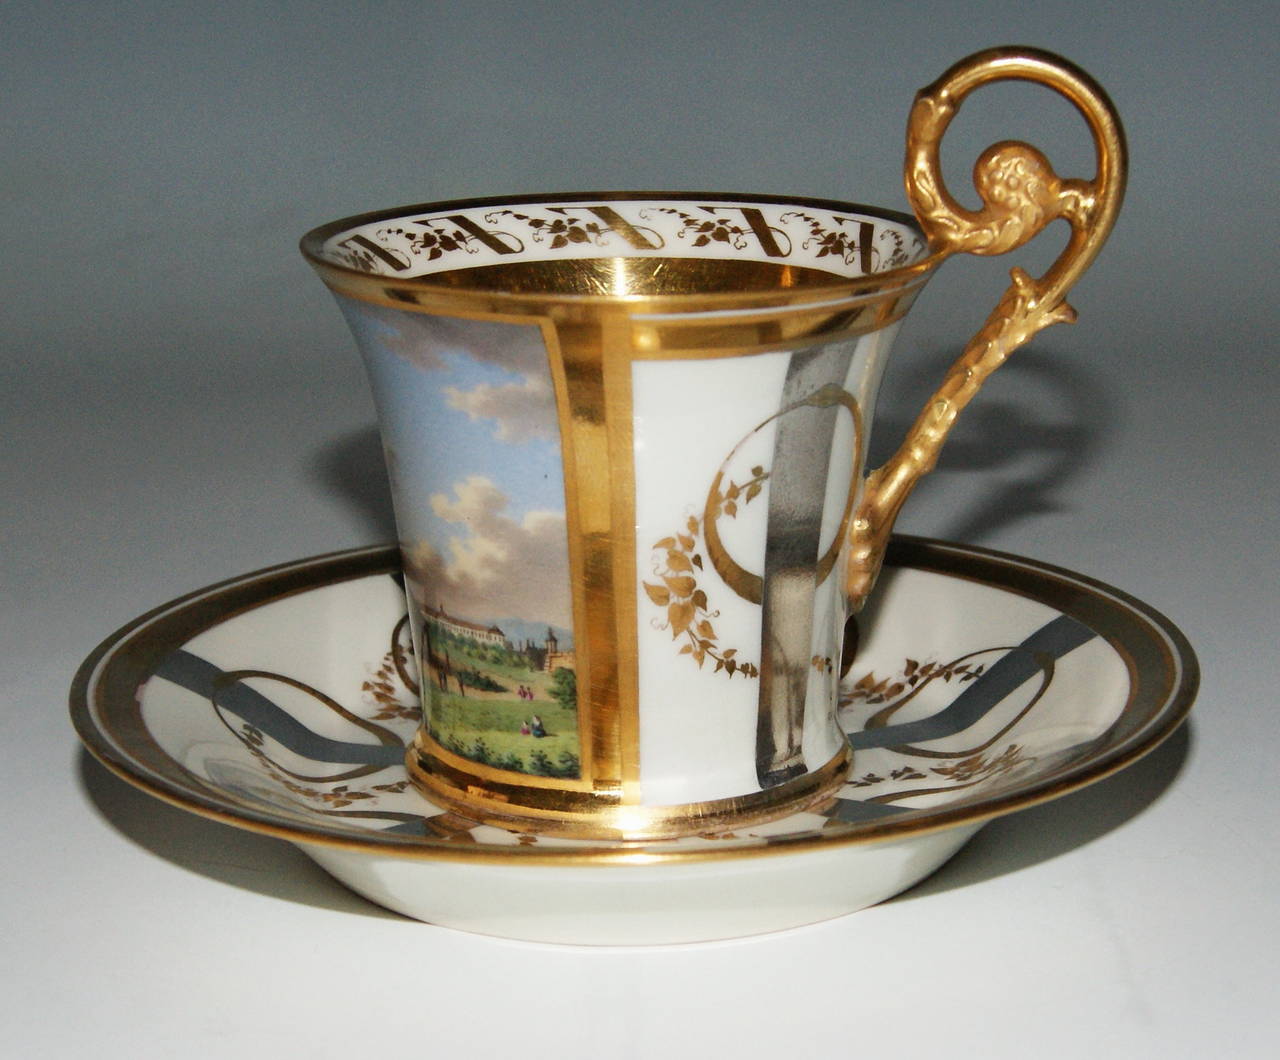 Austrian Imperial Porcelain Cup and Saucer with Landscape Scene, Vienna, 1819